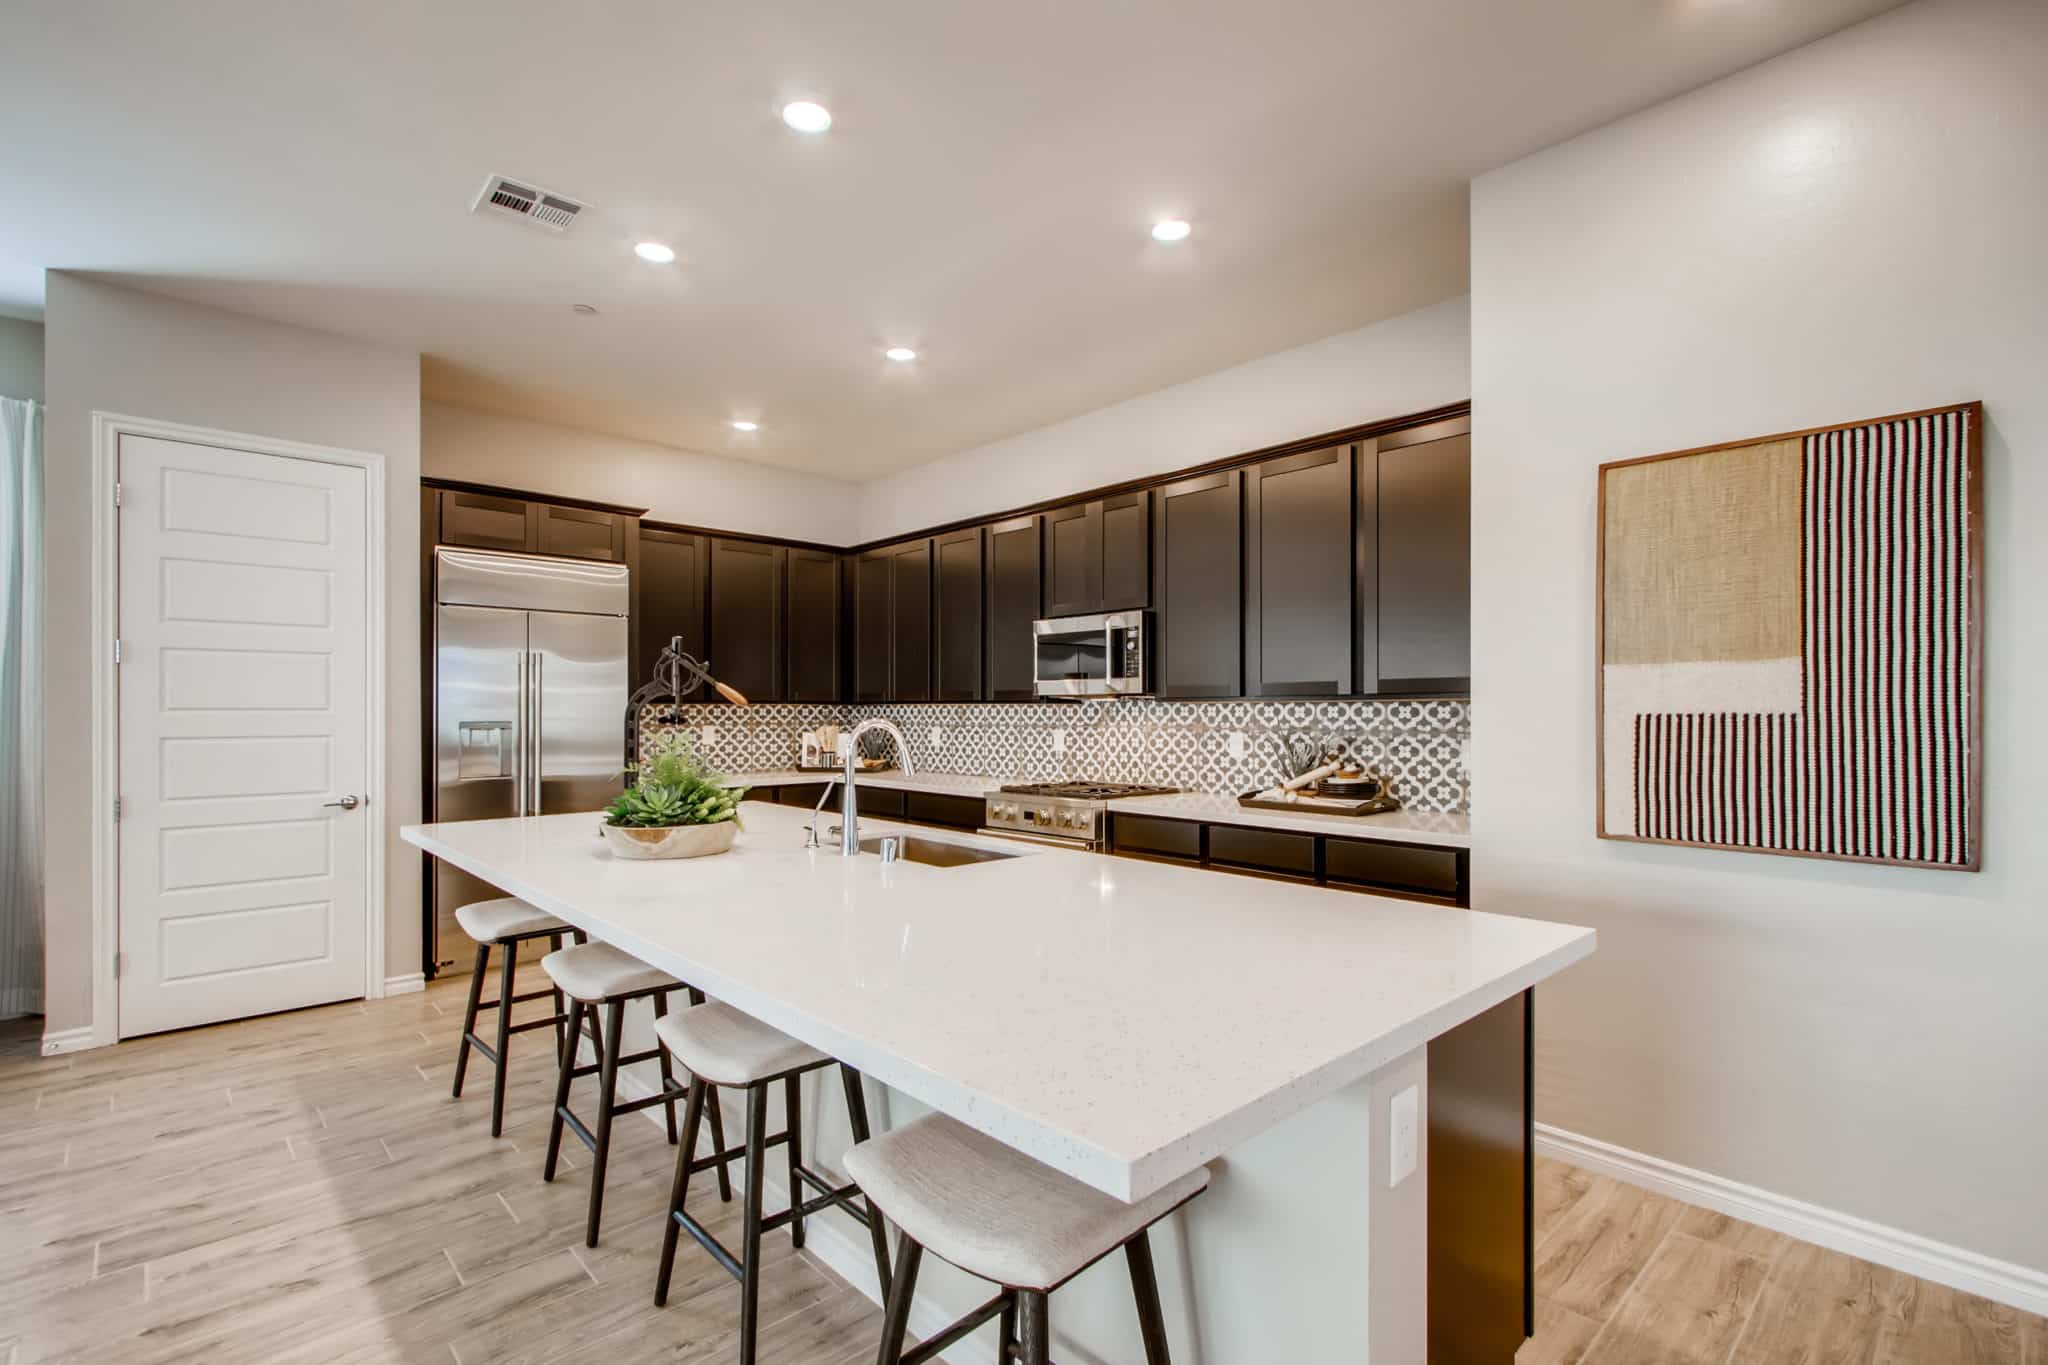 Kitchen of Sawyer model at Heritage by Lennar